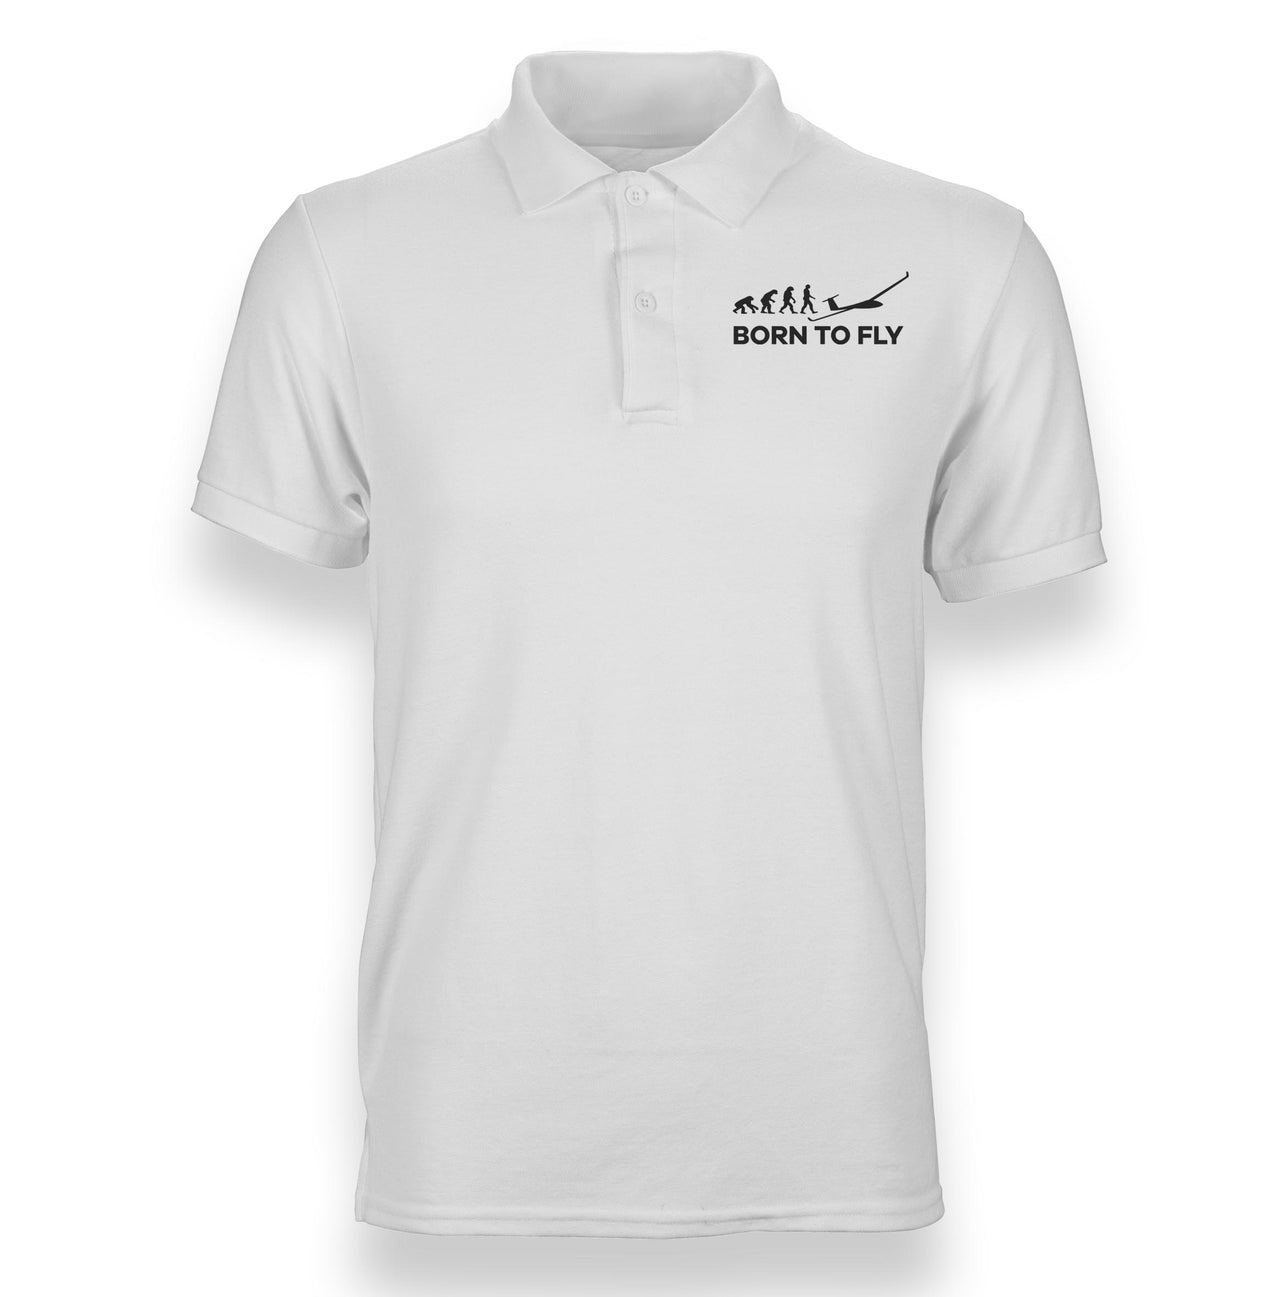 Born To Fly Glider Designed Polo T-Shirts